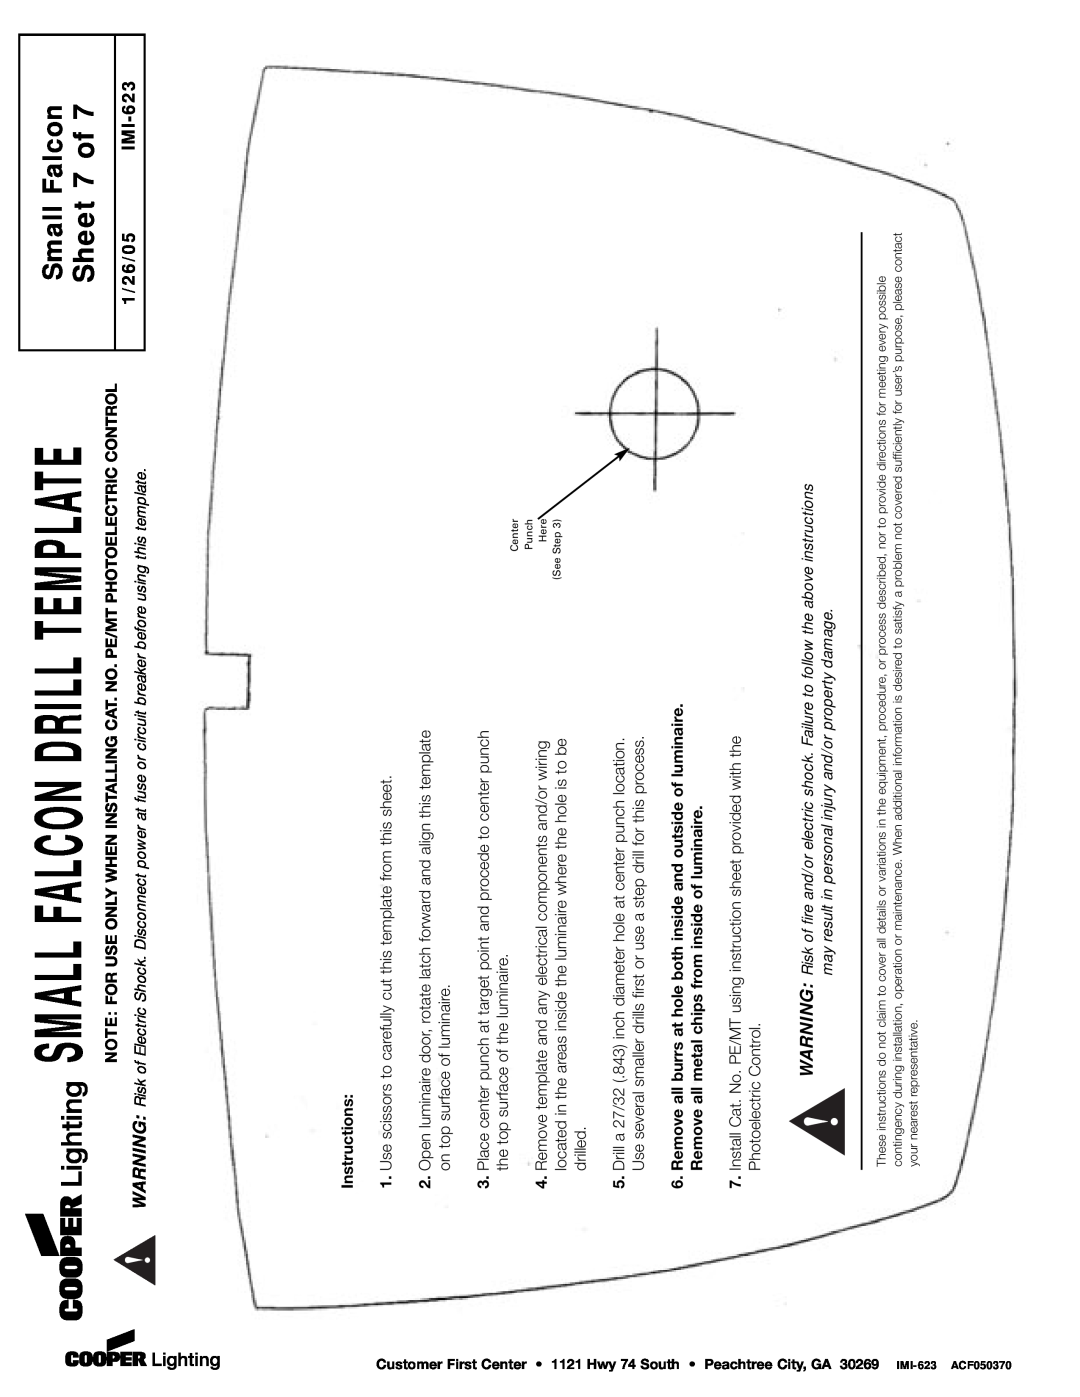 Cooper Lighting P4GE-MX installation instructions Sheet 7 of, Small Falcon Drill Template, 1/26/05 IMI-623 